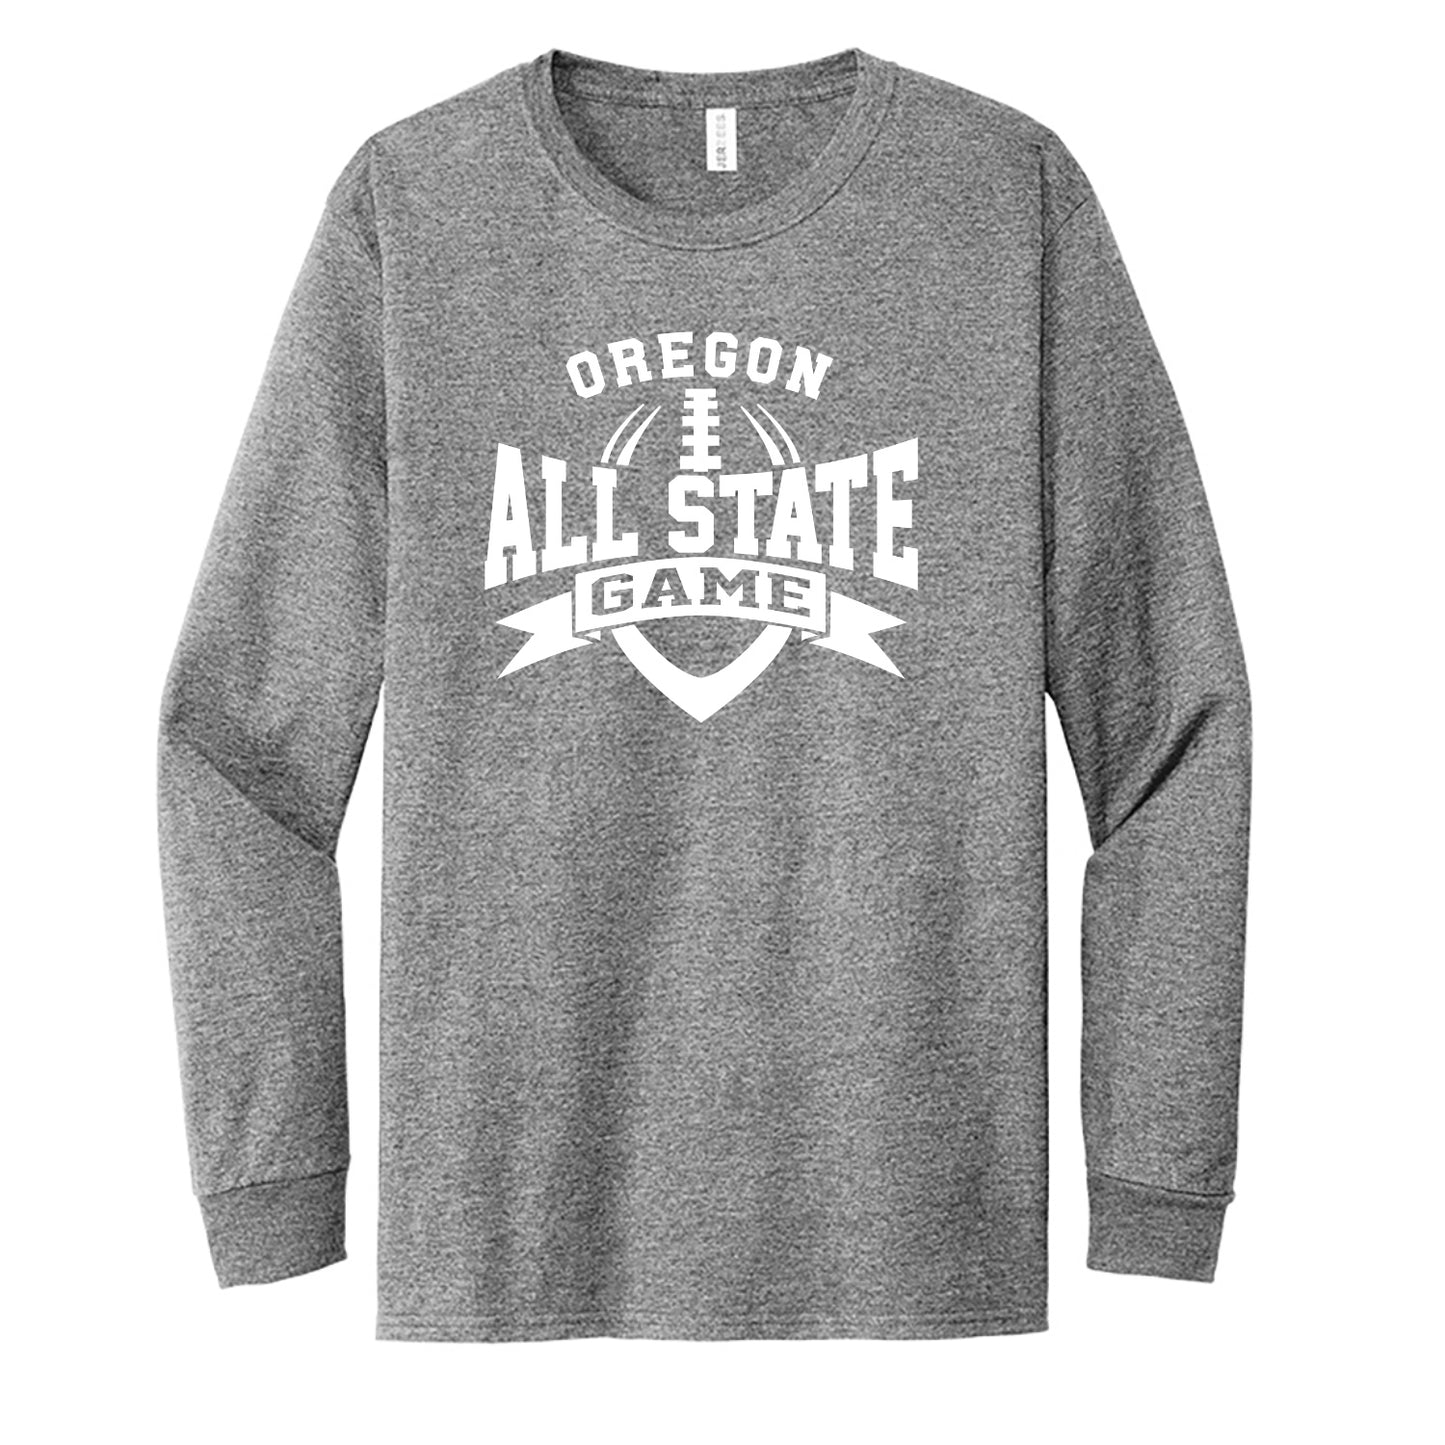 Oregon All State - Men's Premium Long Sleeve T-Shirt - 2 colors available